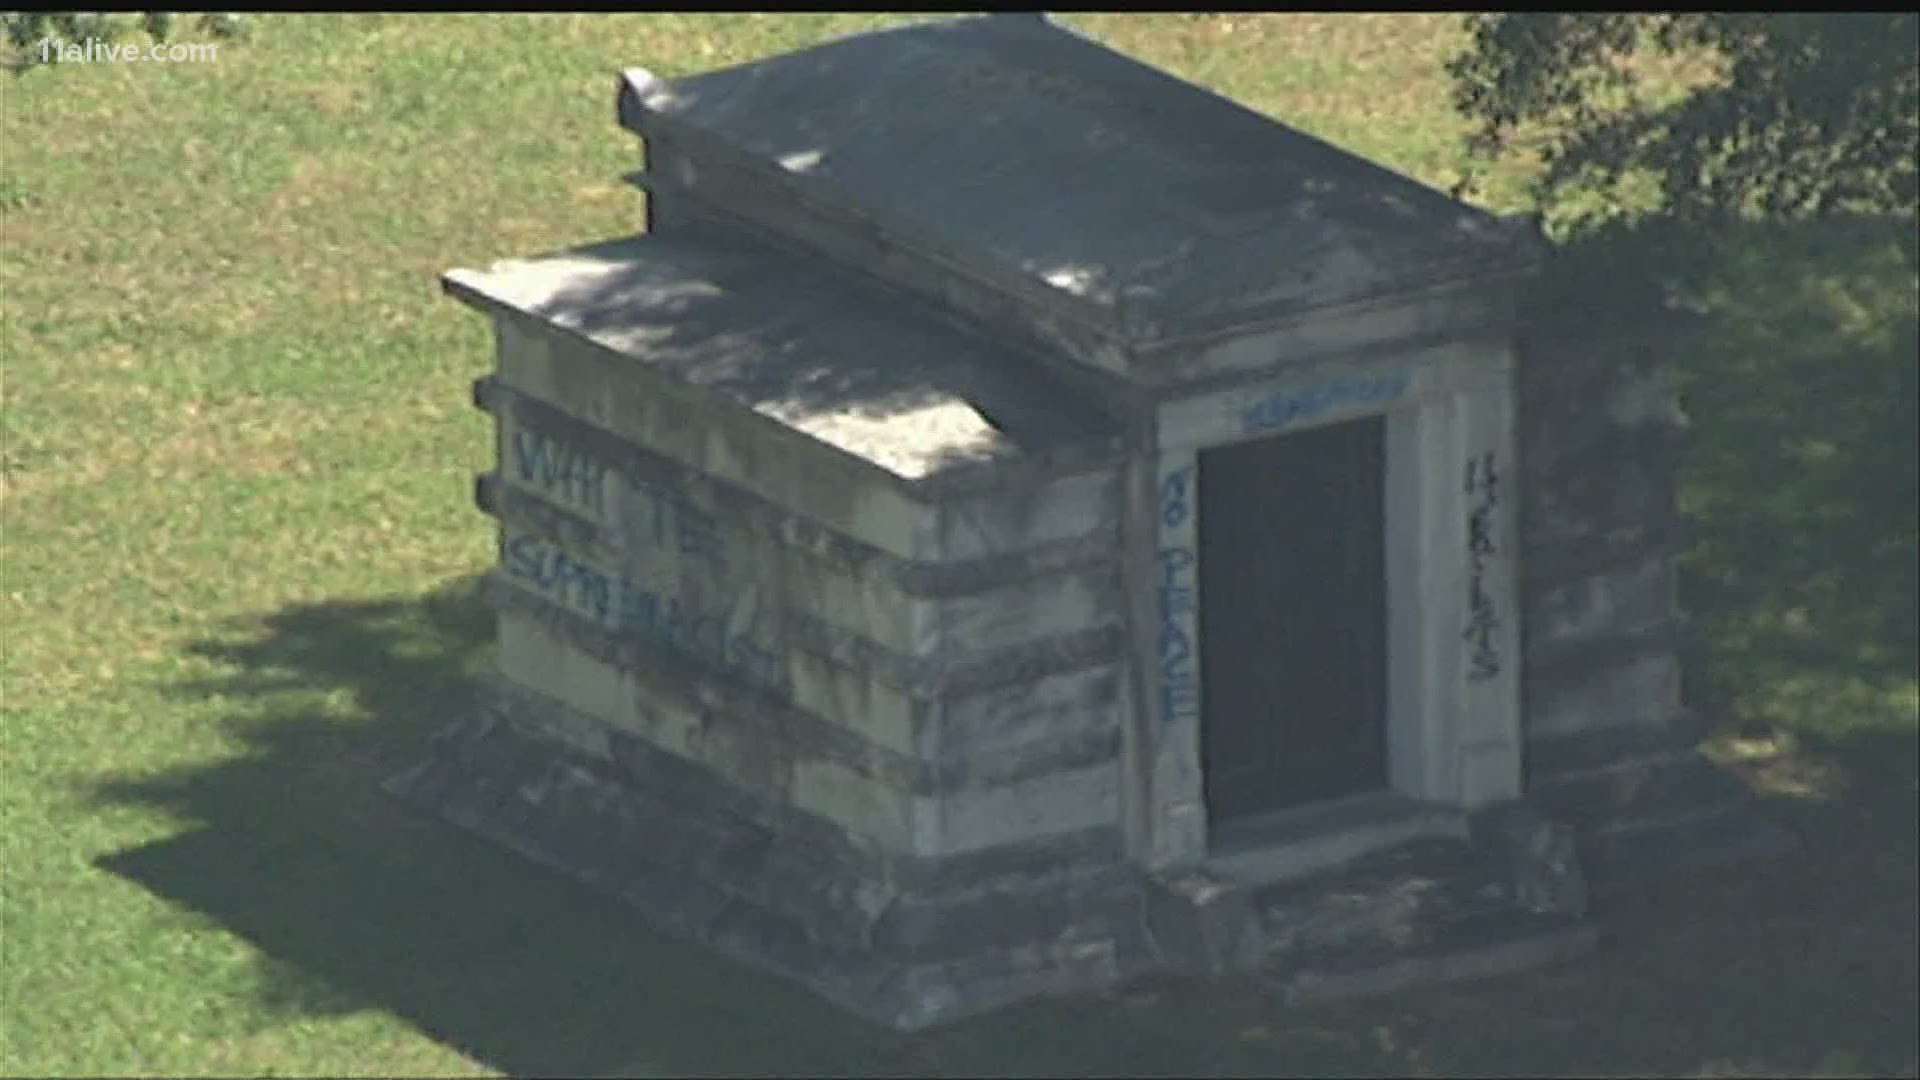 Generations of the Grady family are buried there and many locations in Atlanta are named after the man, though his racial beliefs have been called into question.